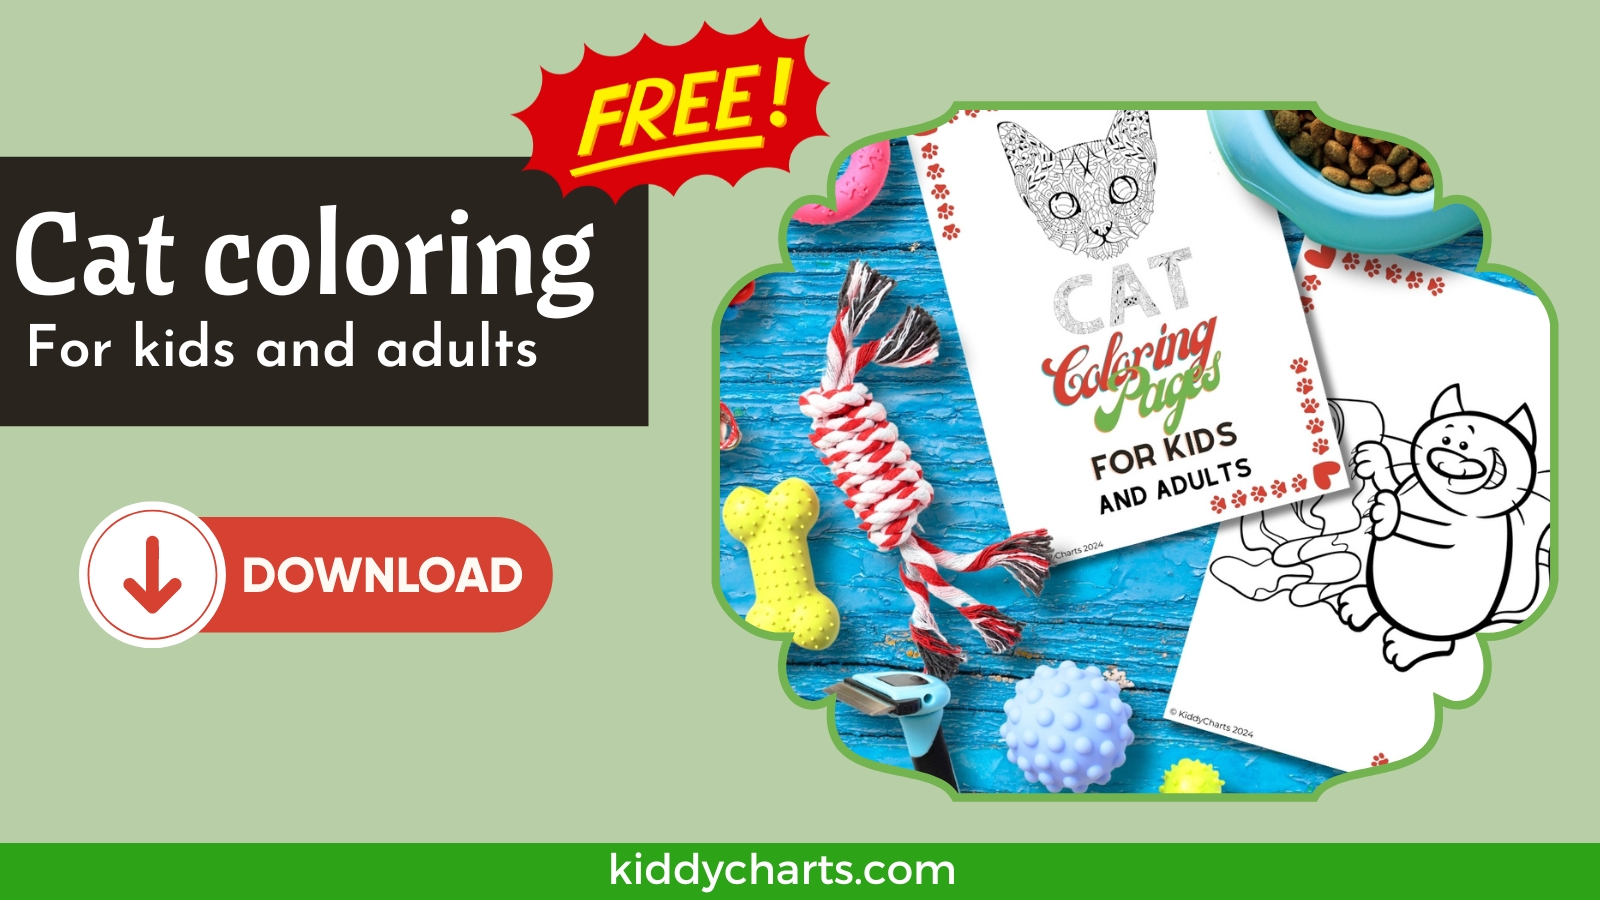 Cat coloring pages for kids and adults: Free eBook